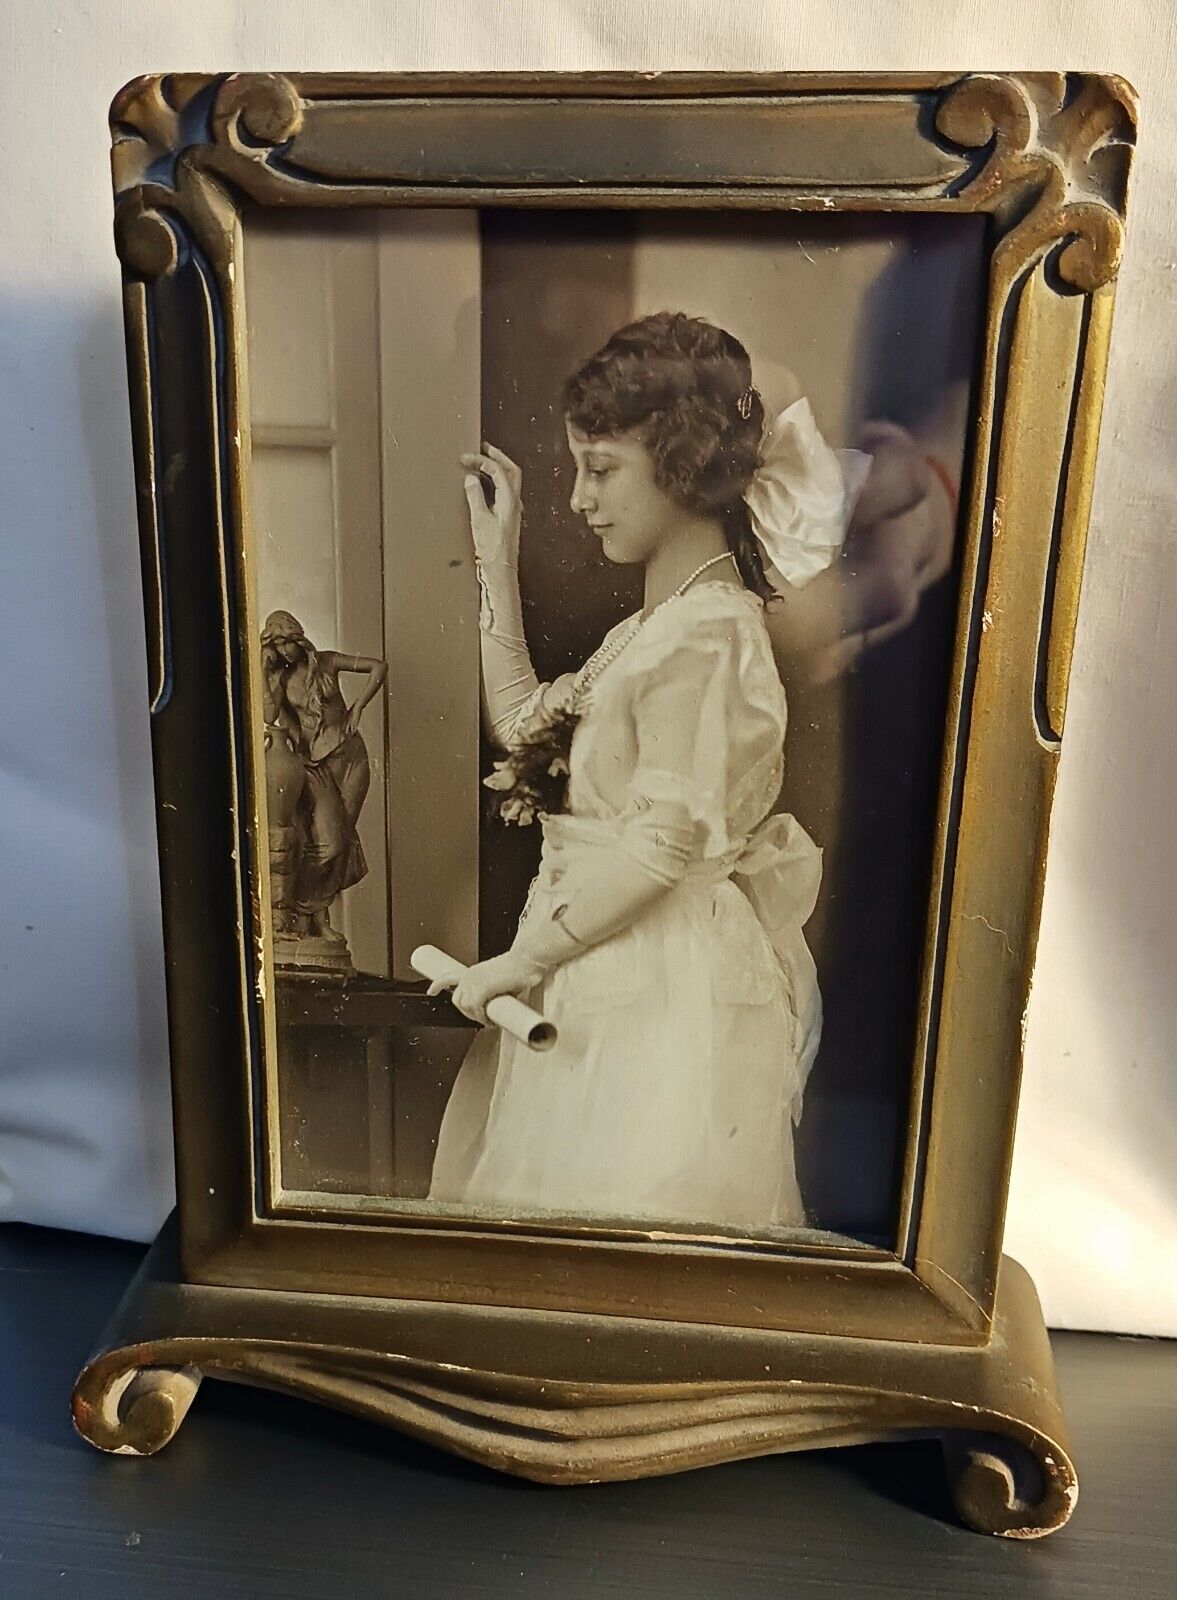 Remarkable Framed Antique Portrait Of A Beautiful Young Girl Art Deco Era